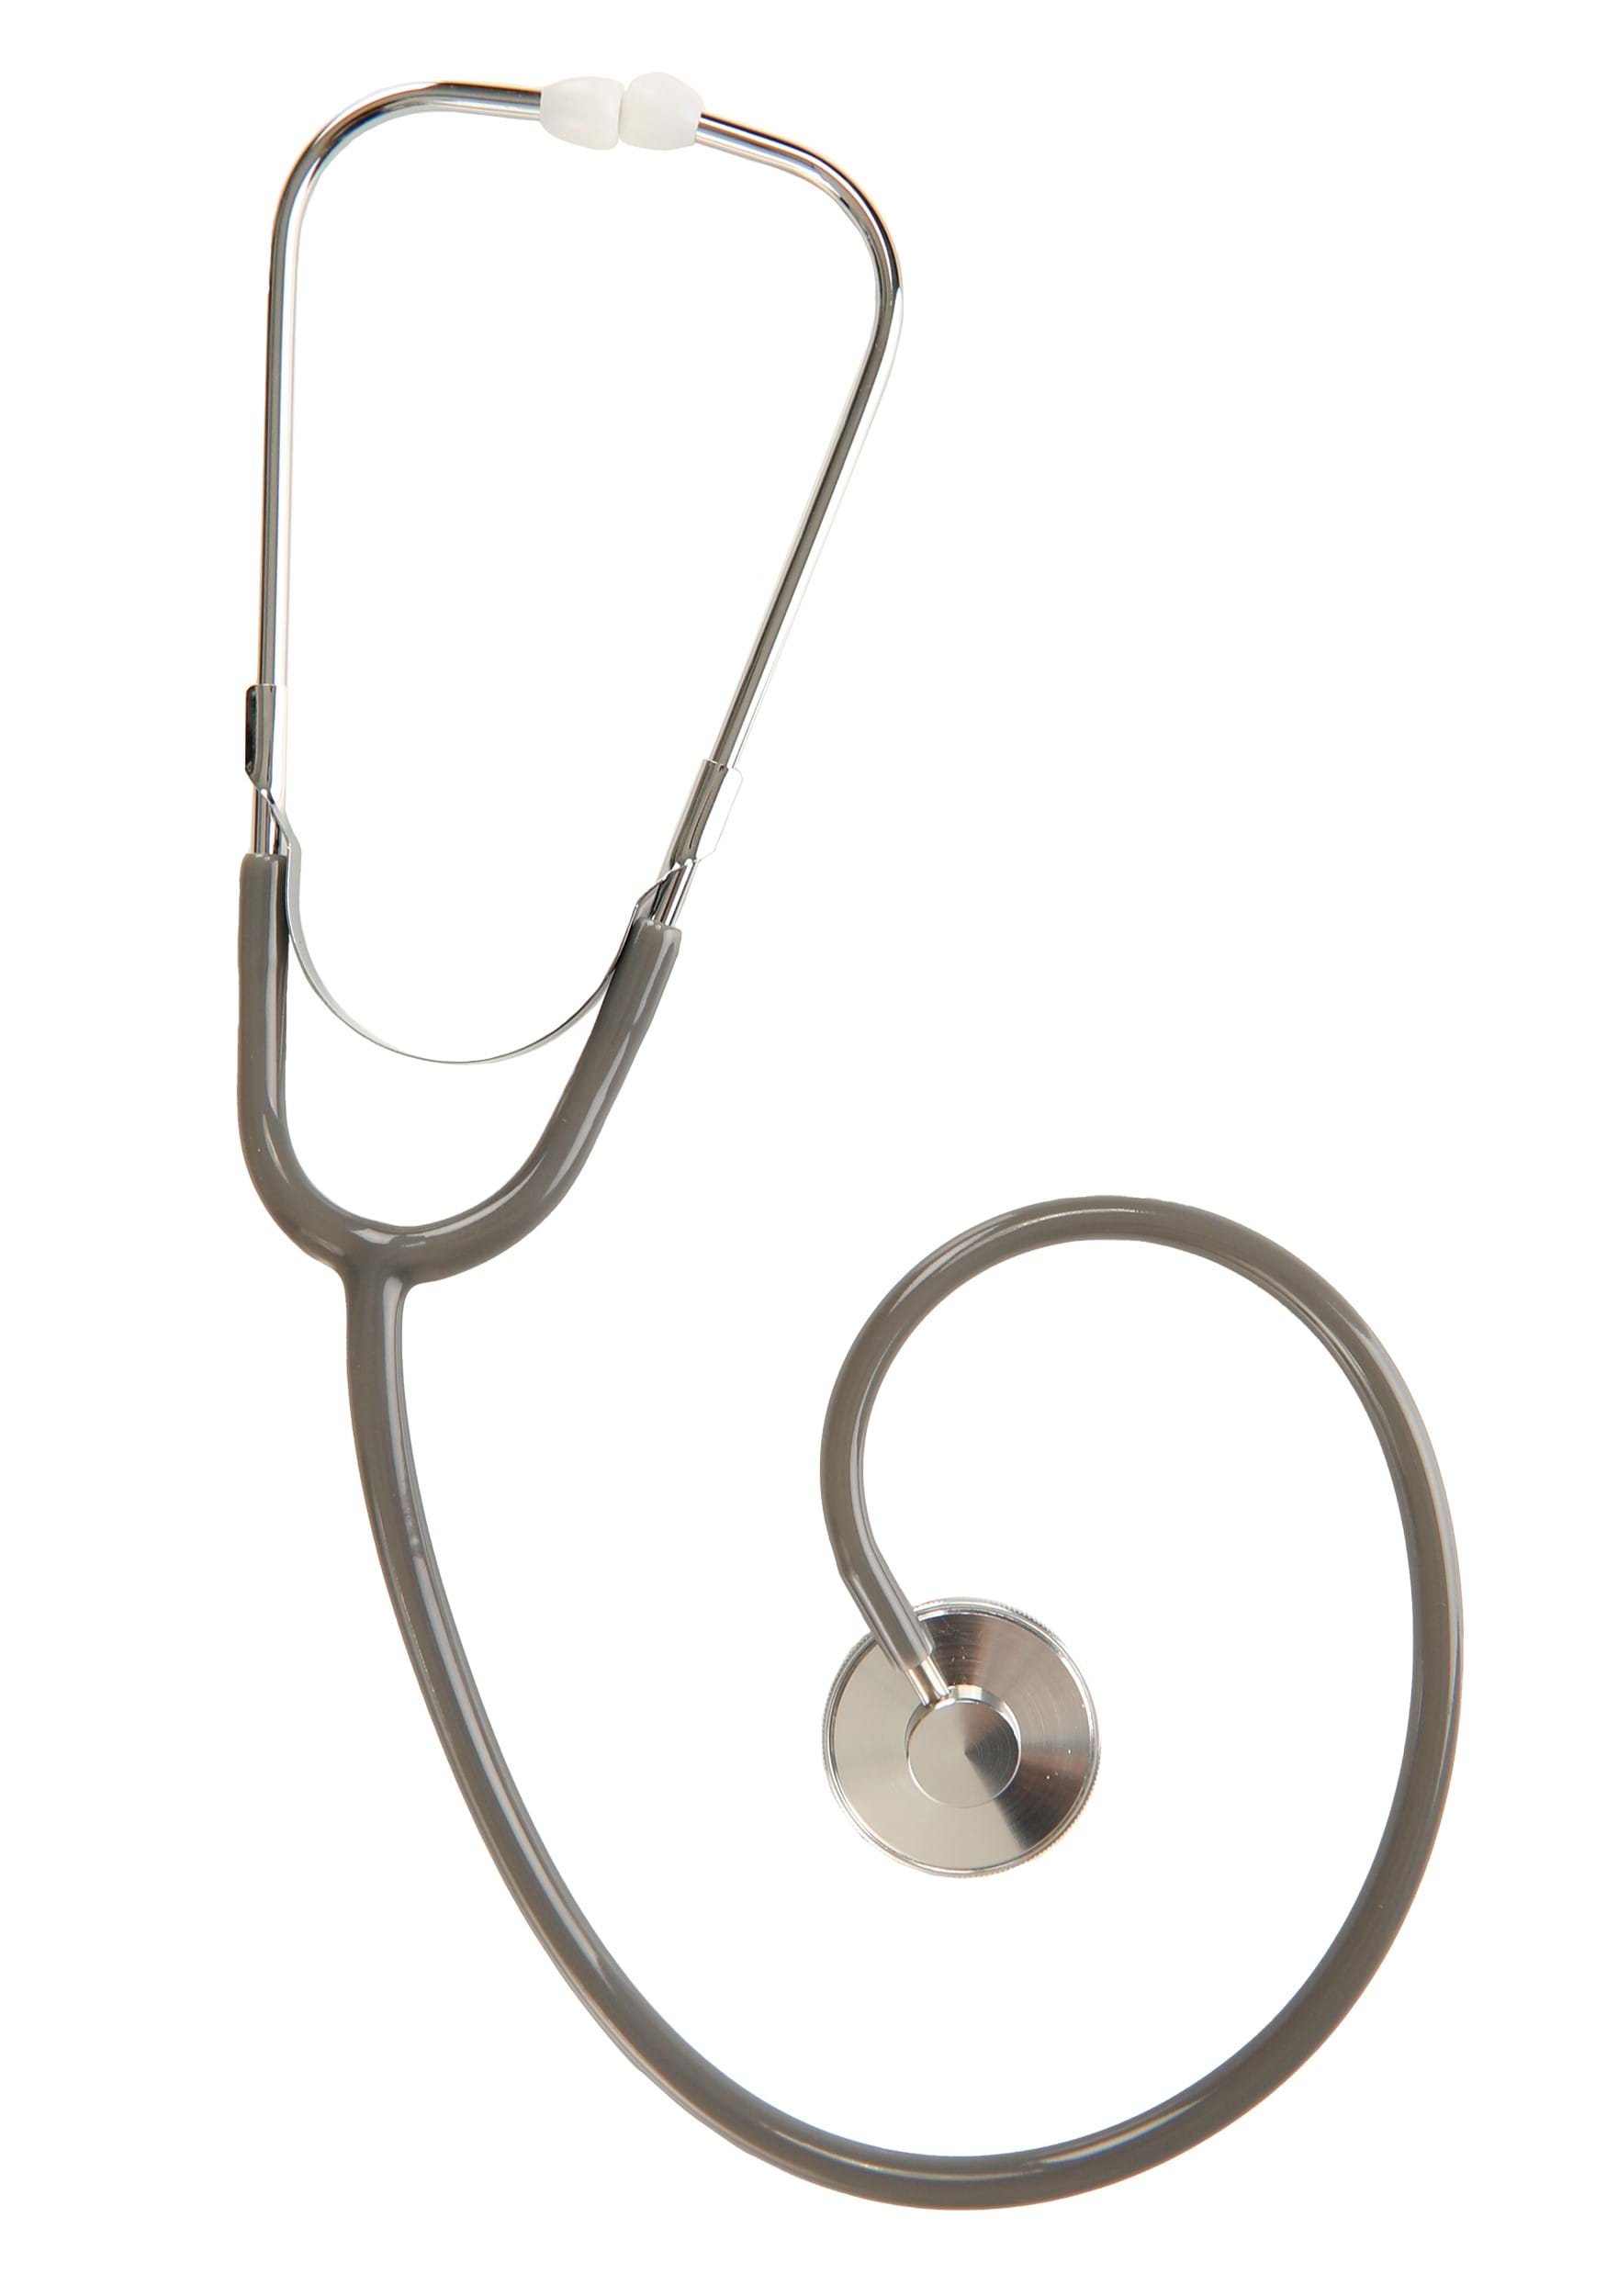 Realistic Doctor Stethoscope Prop